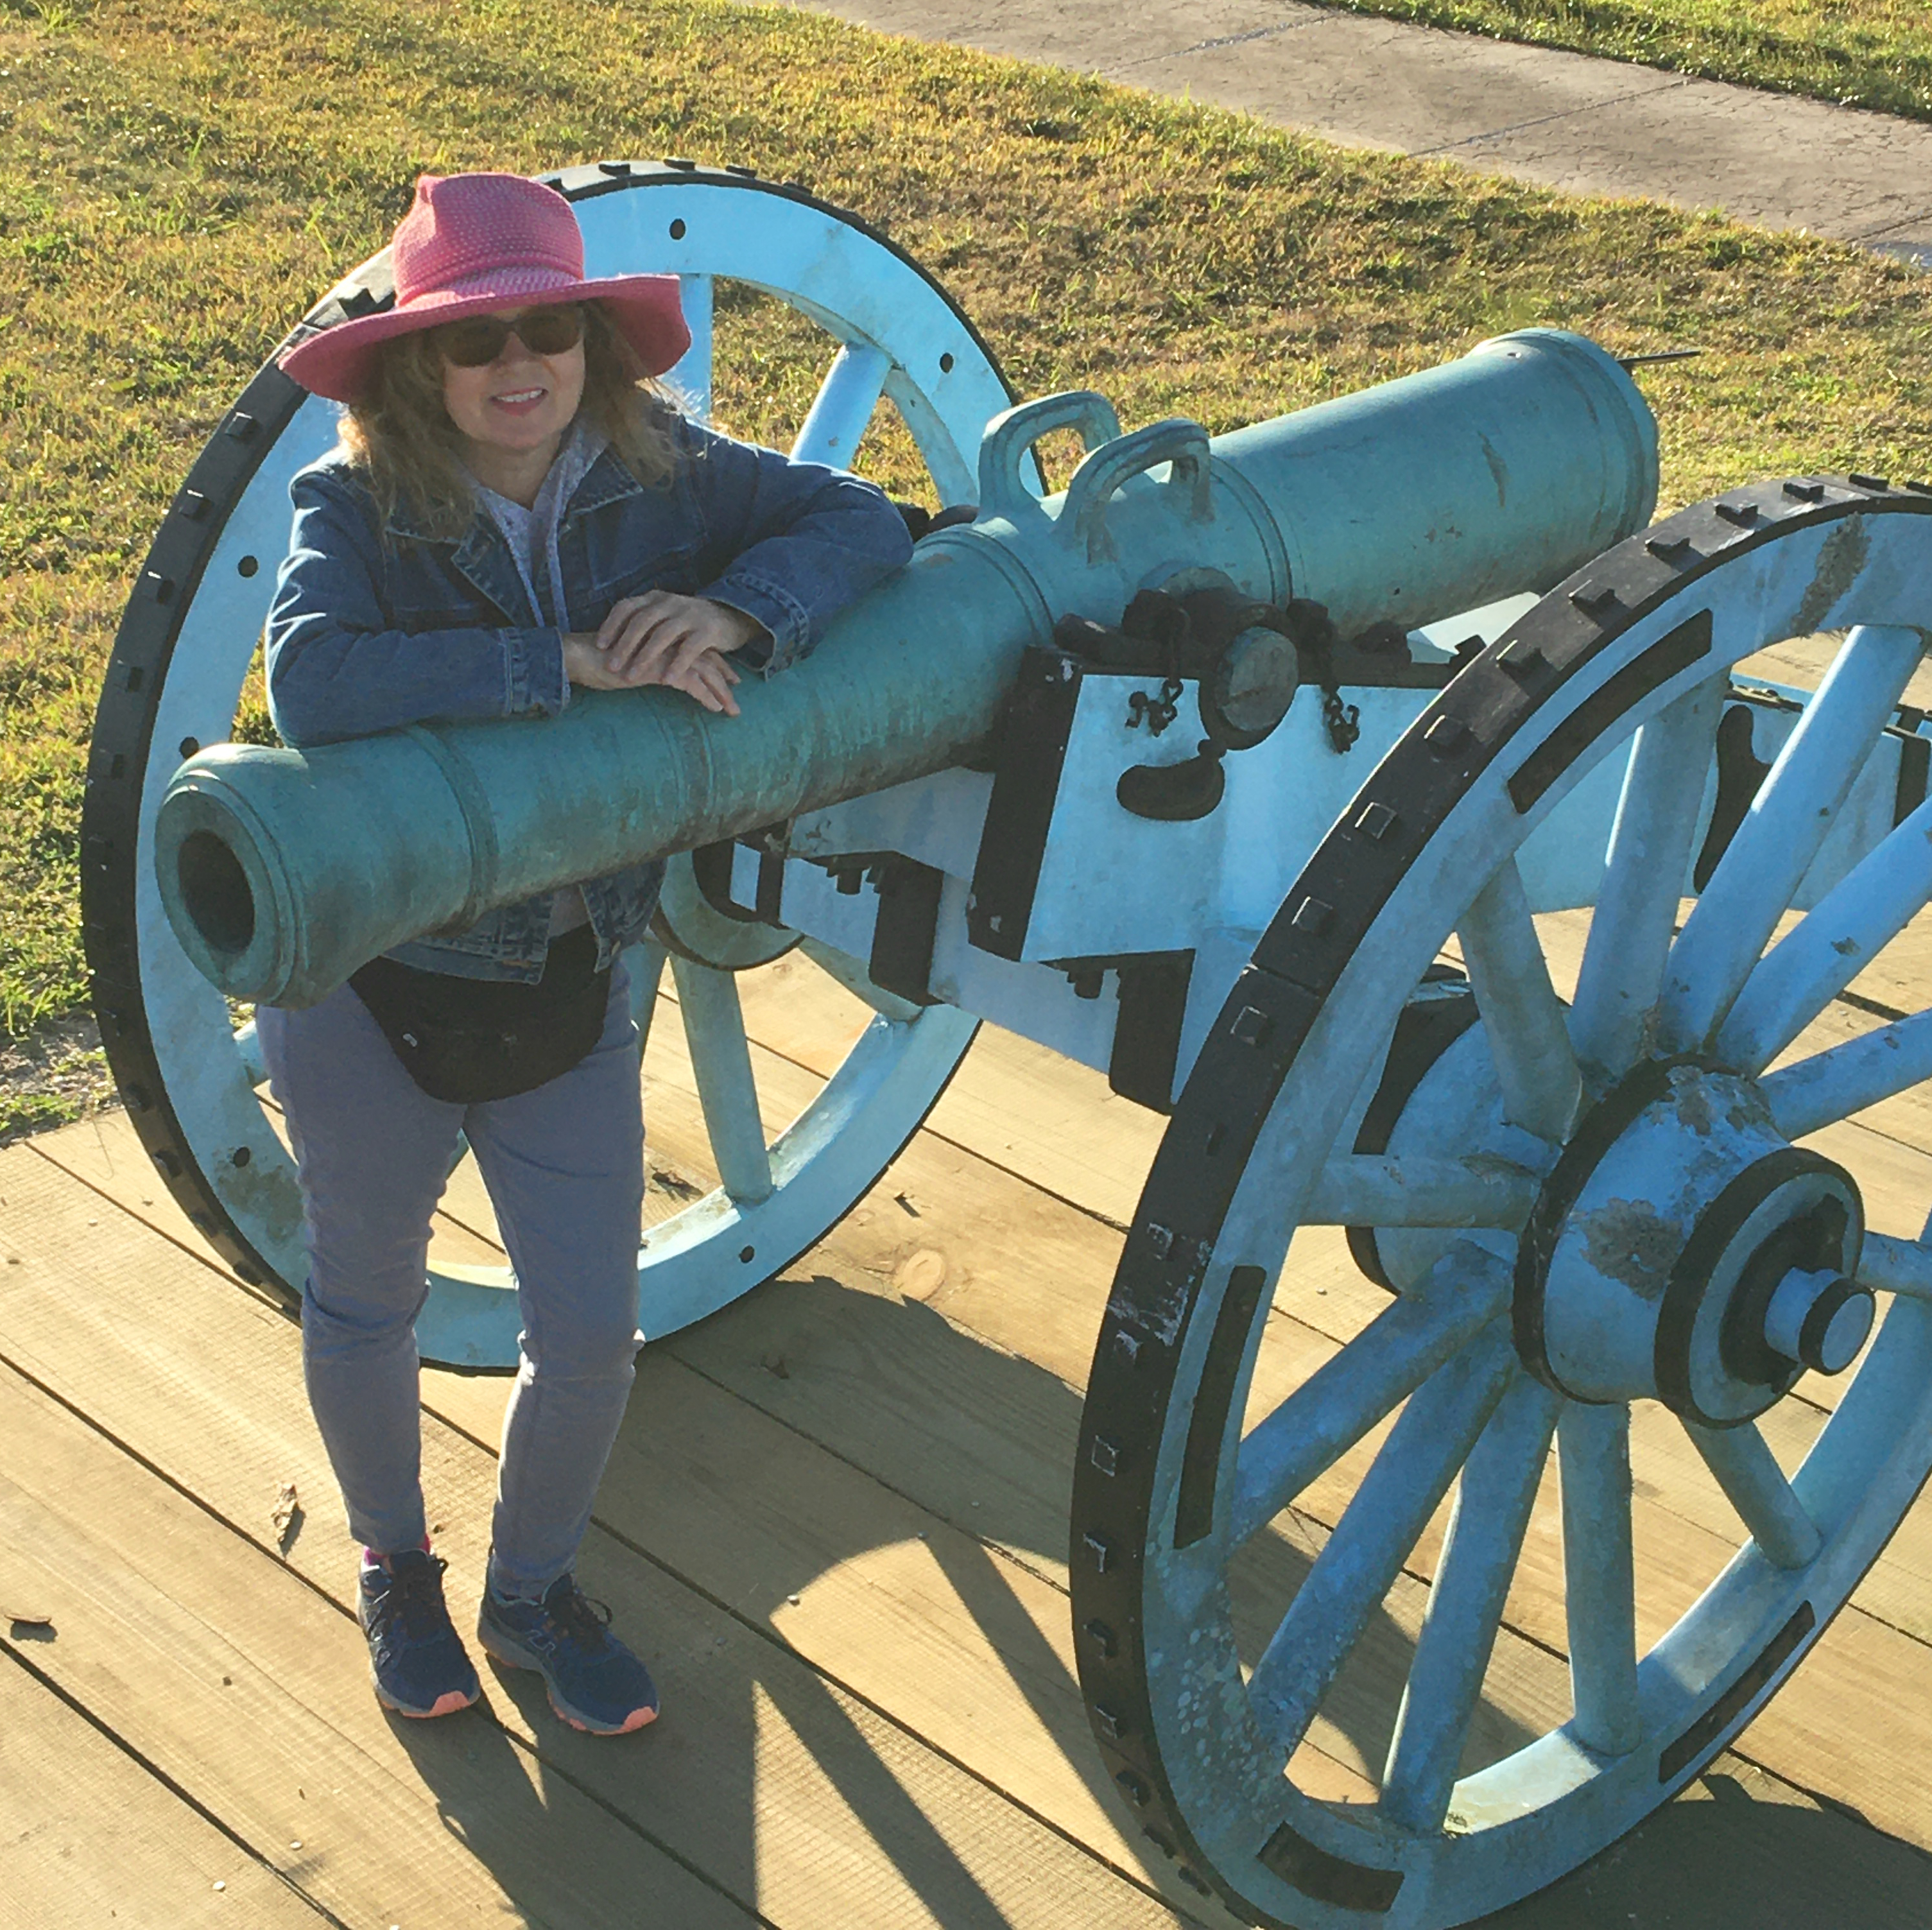 Gina and I went to the Chalmette Battlefield.